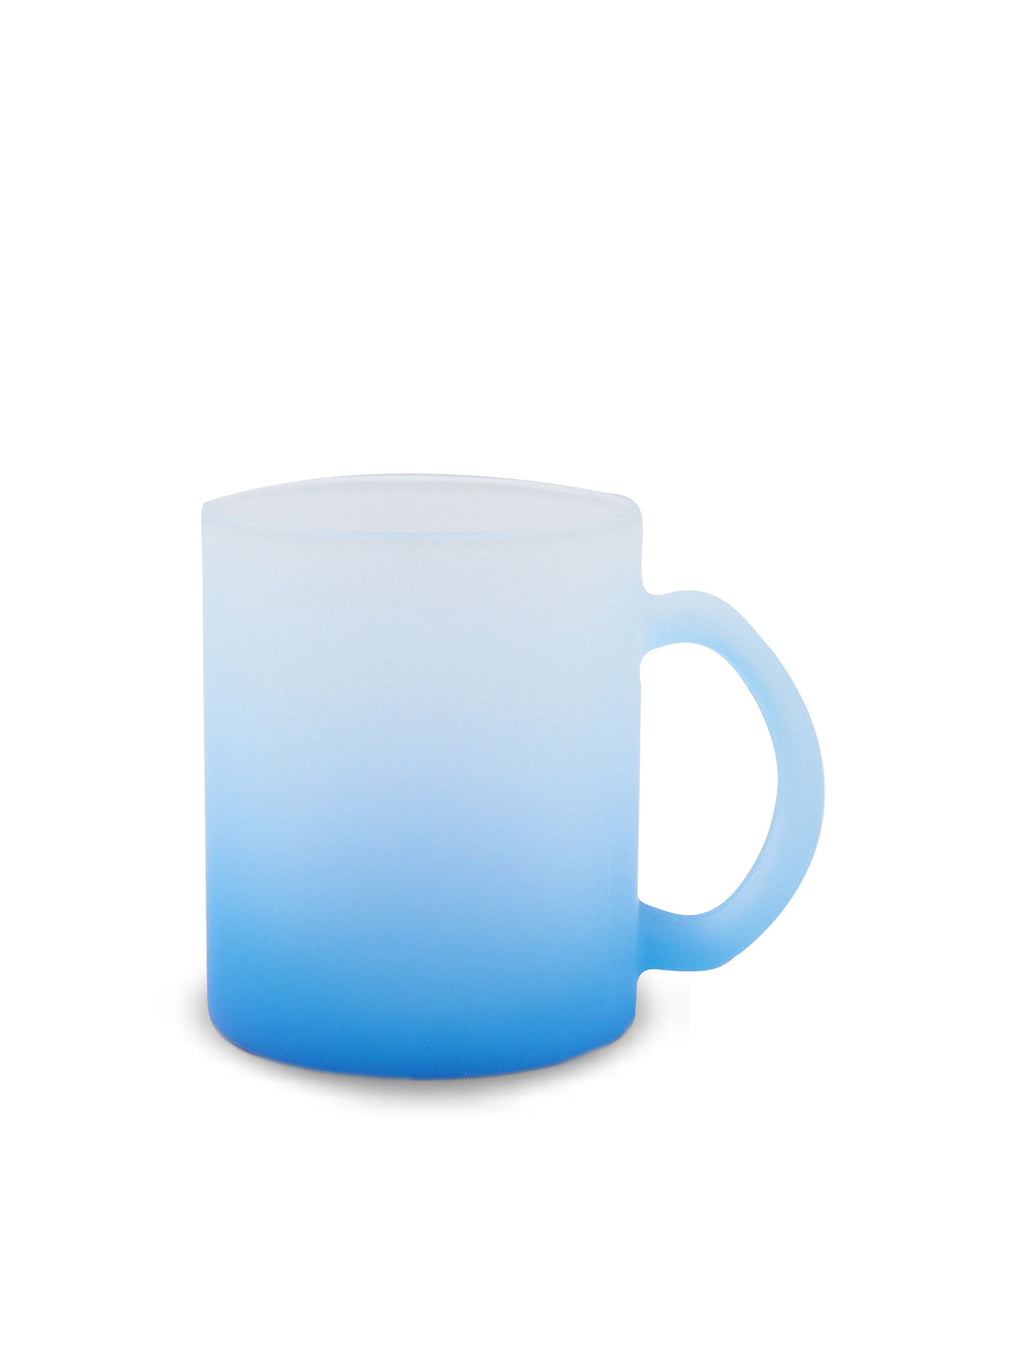 sublimation-glass-mug-frosted-the-tumbler-company